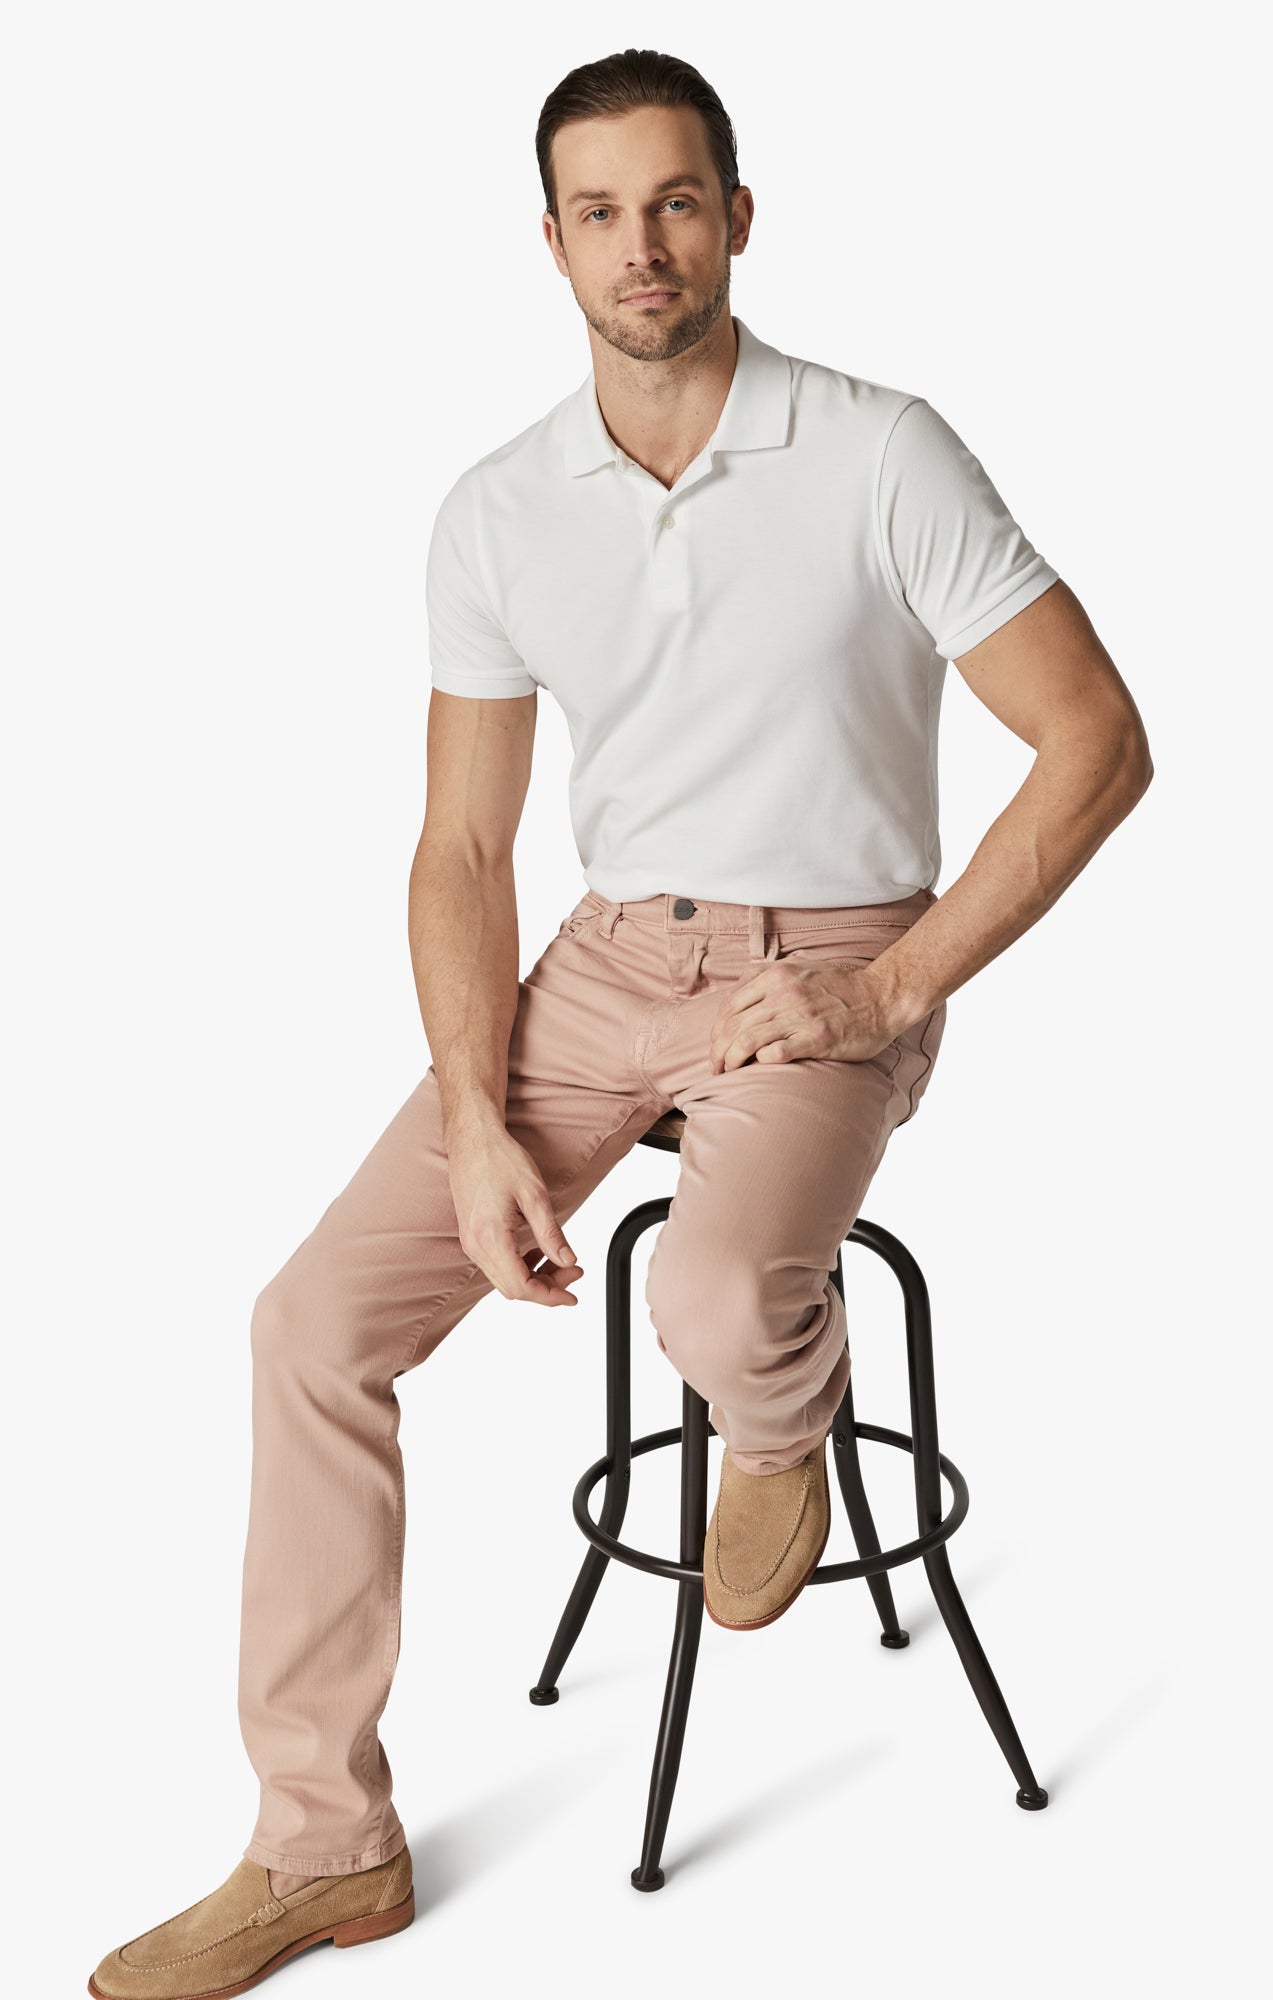 Courage Straight Leg Pants In Rose Comfort